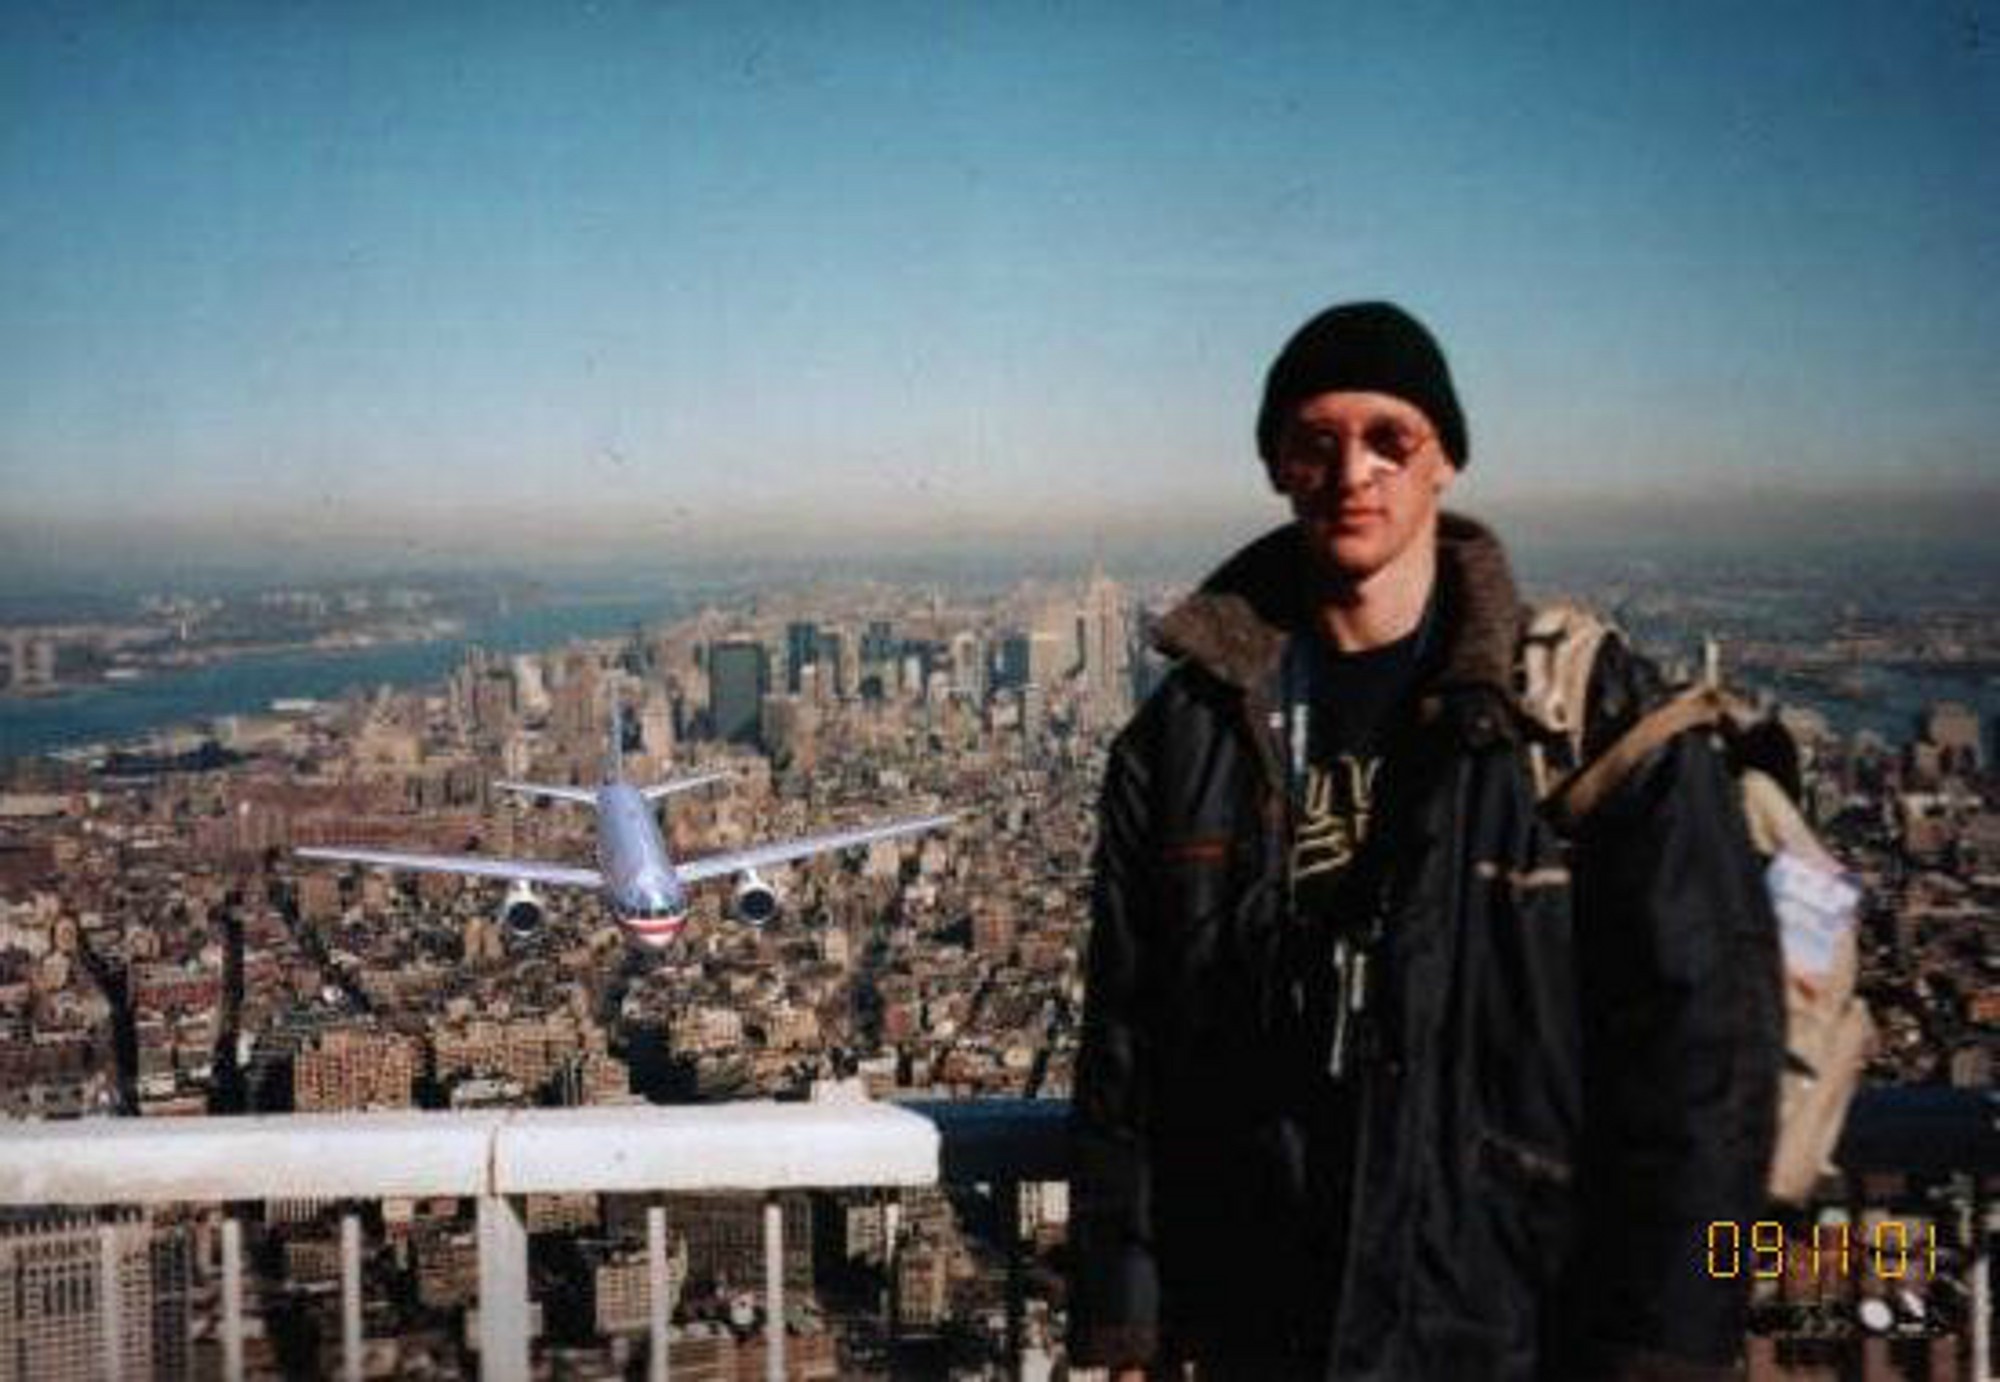 9-11 Tourist-Possibly one of the most famous hoax photos ever taken, it was at first believed that this photo was retrieved from a camera at Ground Zero but only later did people realize it was a fake.